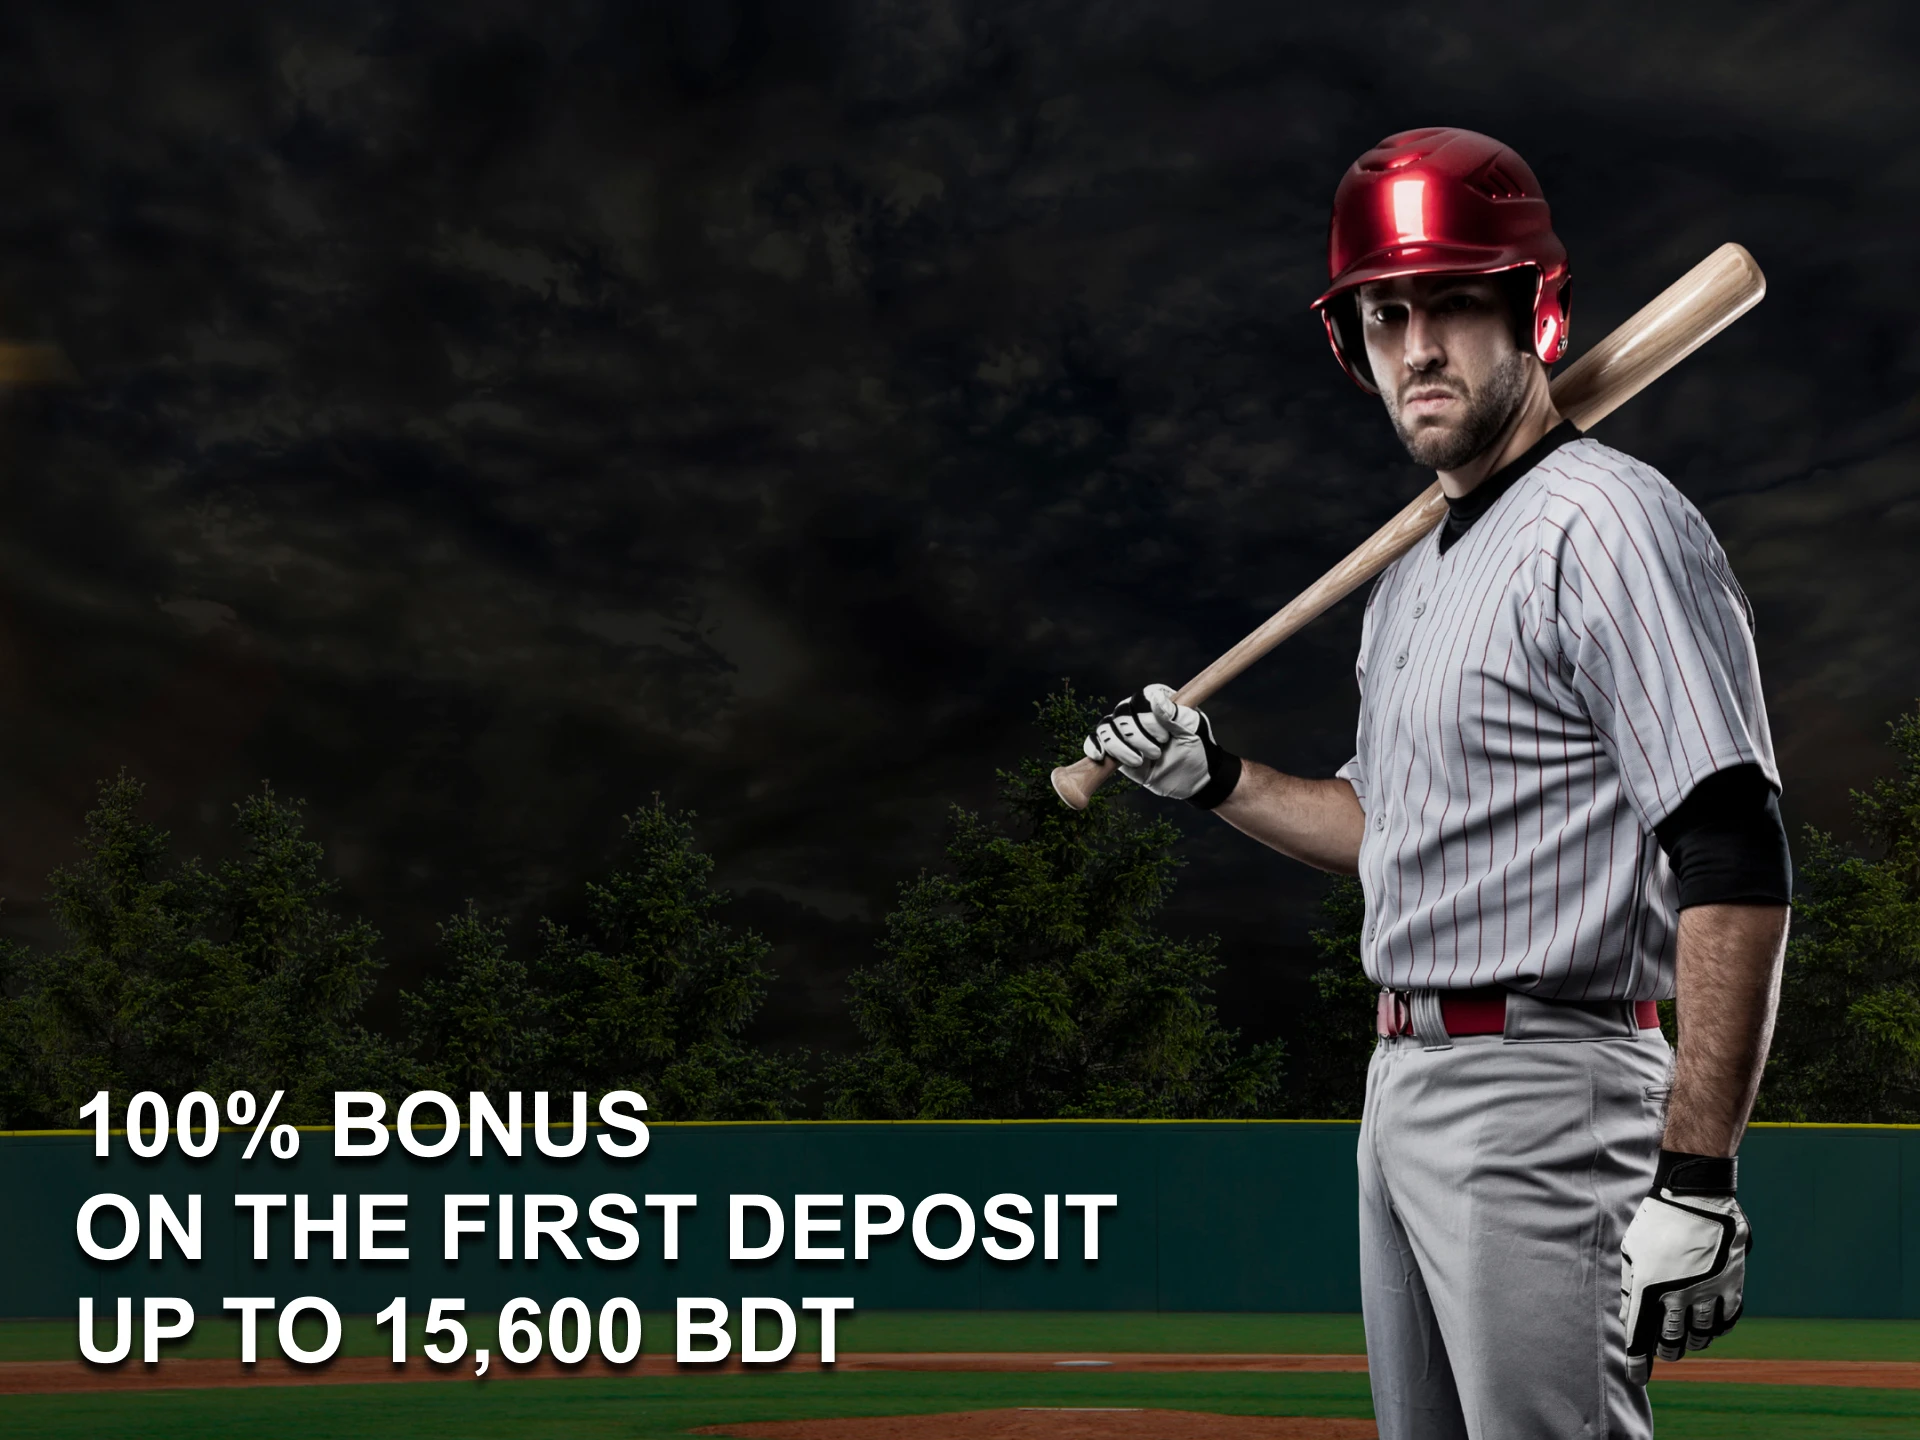 For new users, there is a special welcome bonus on betting.